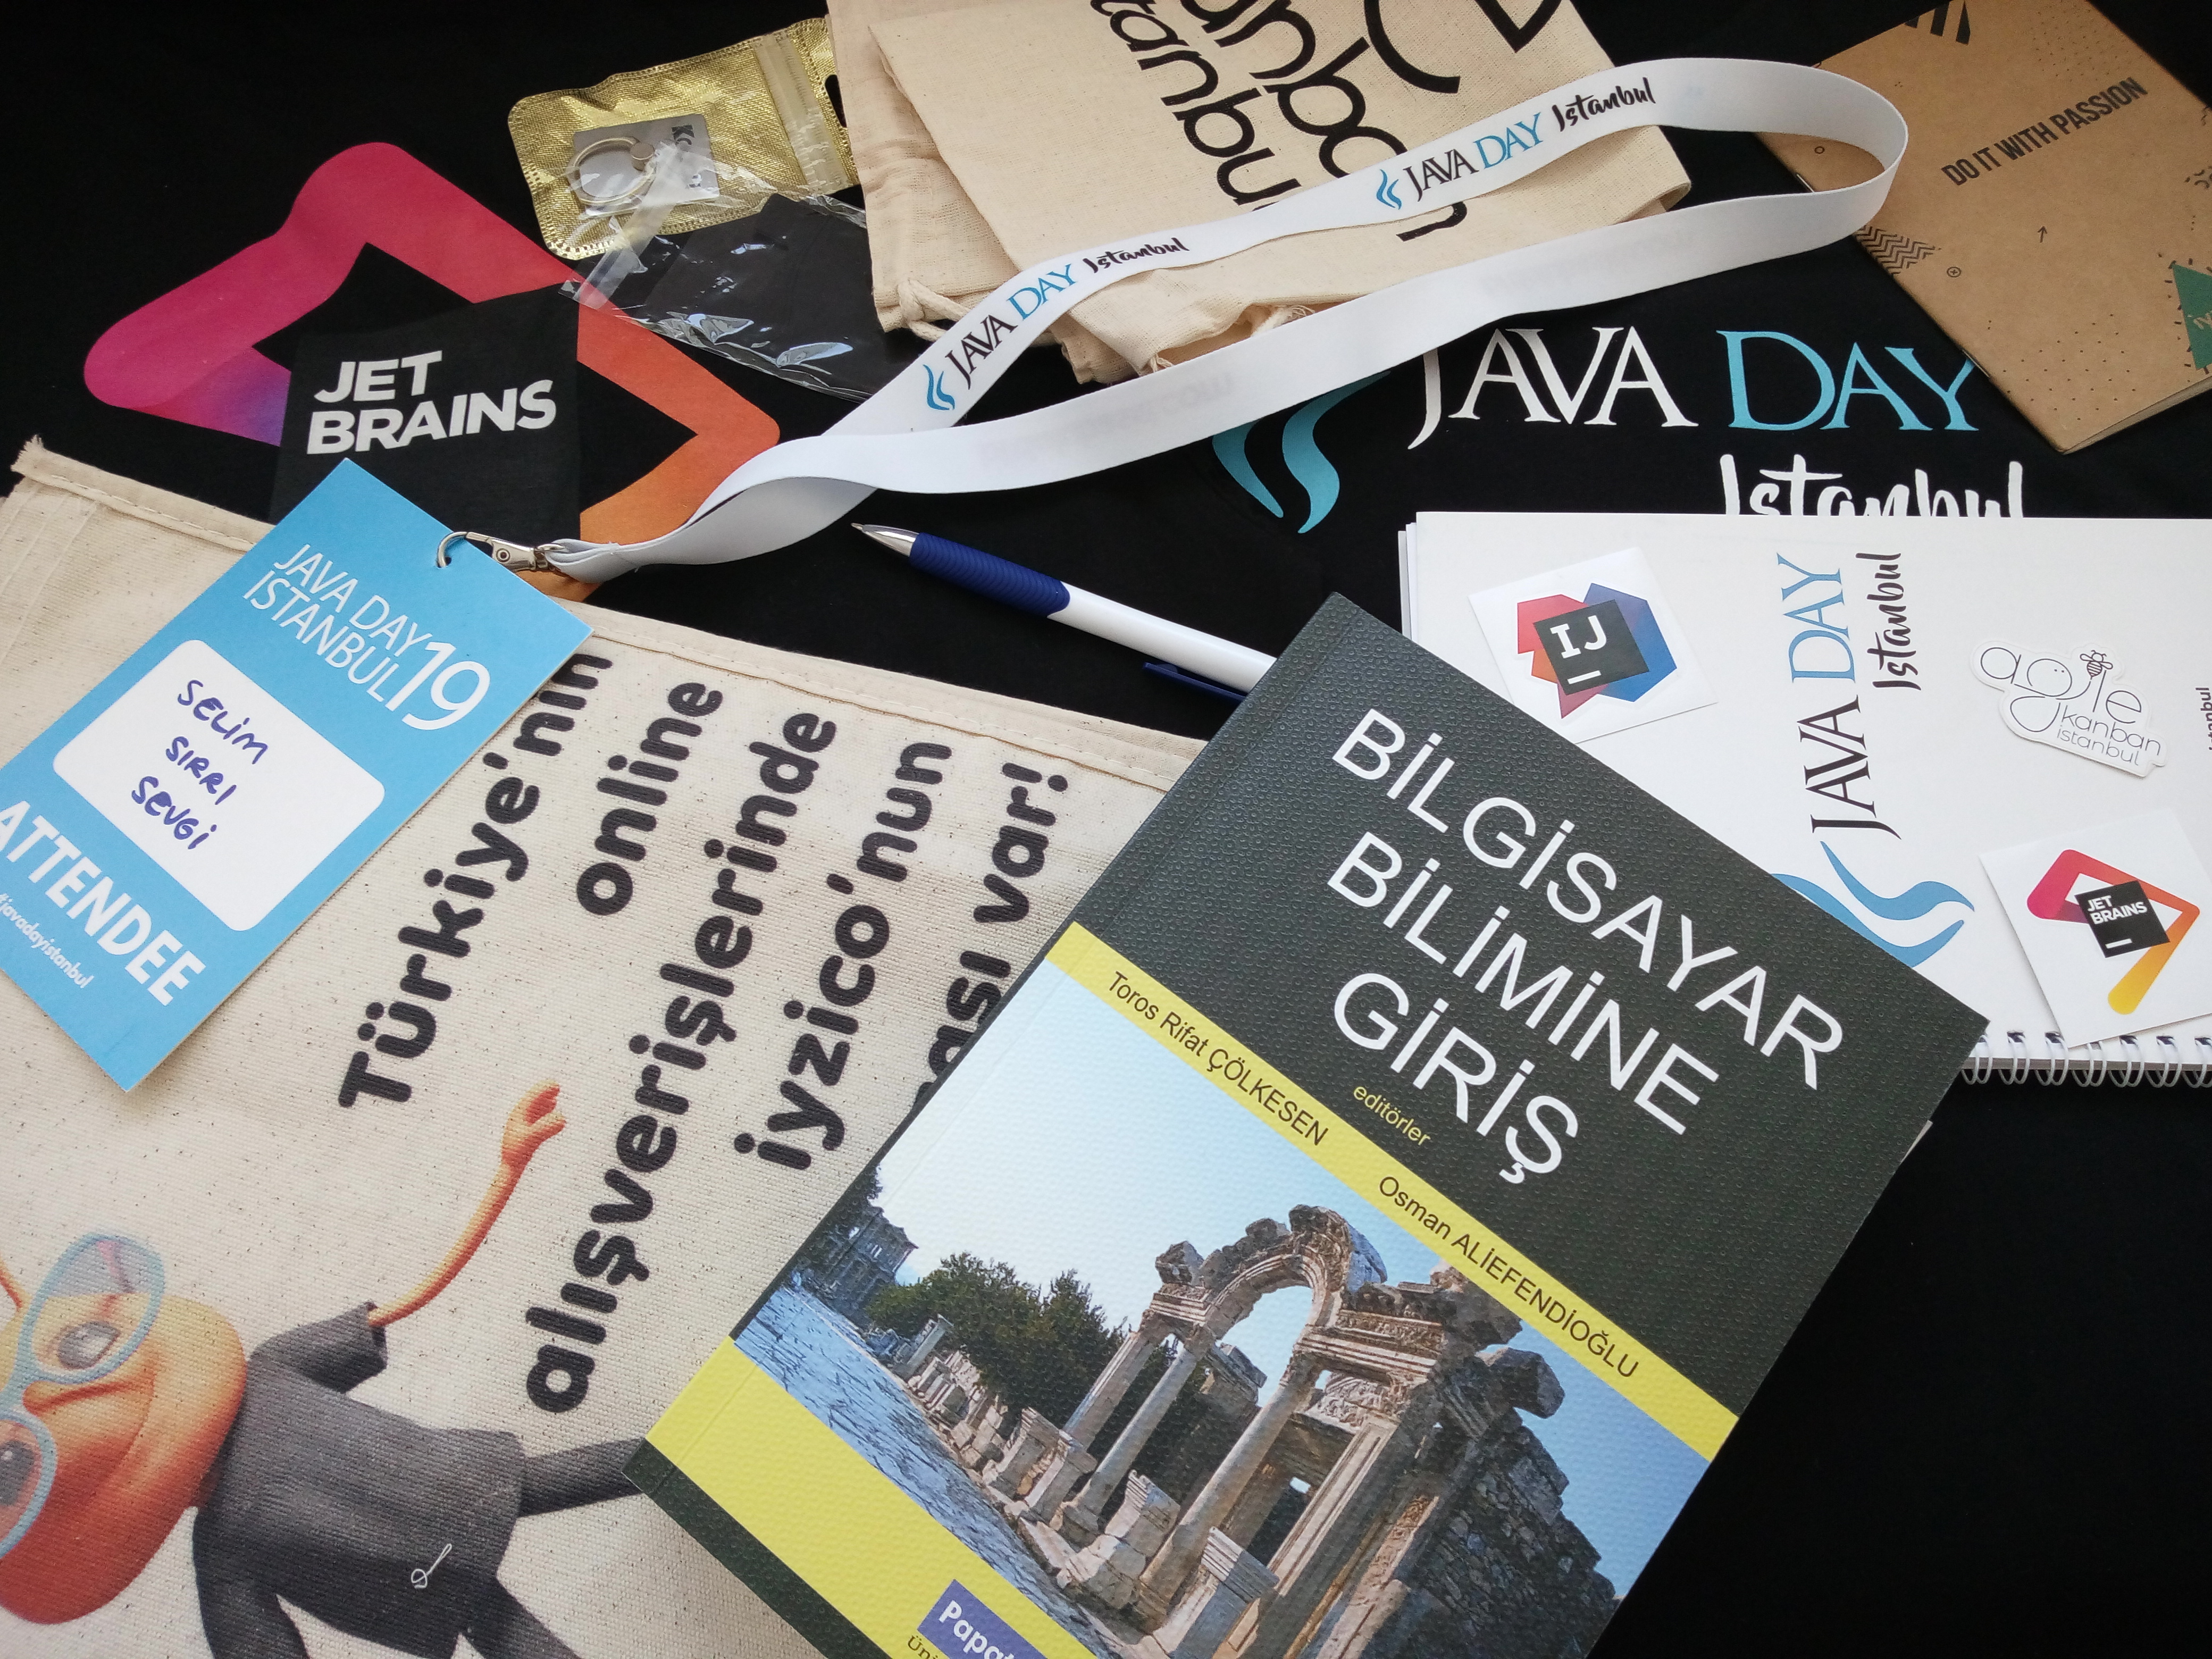 javaday istanbul schedule